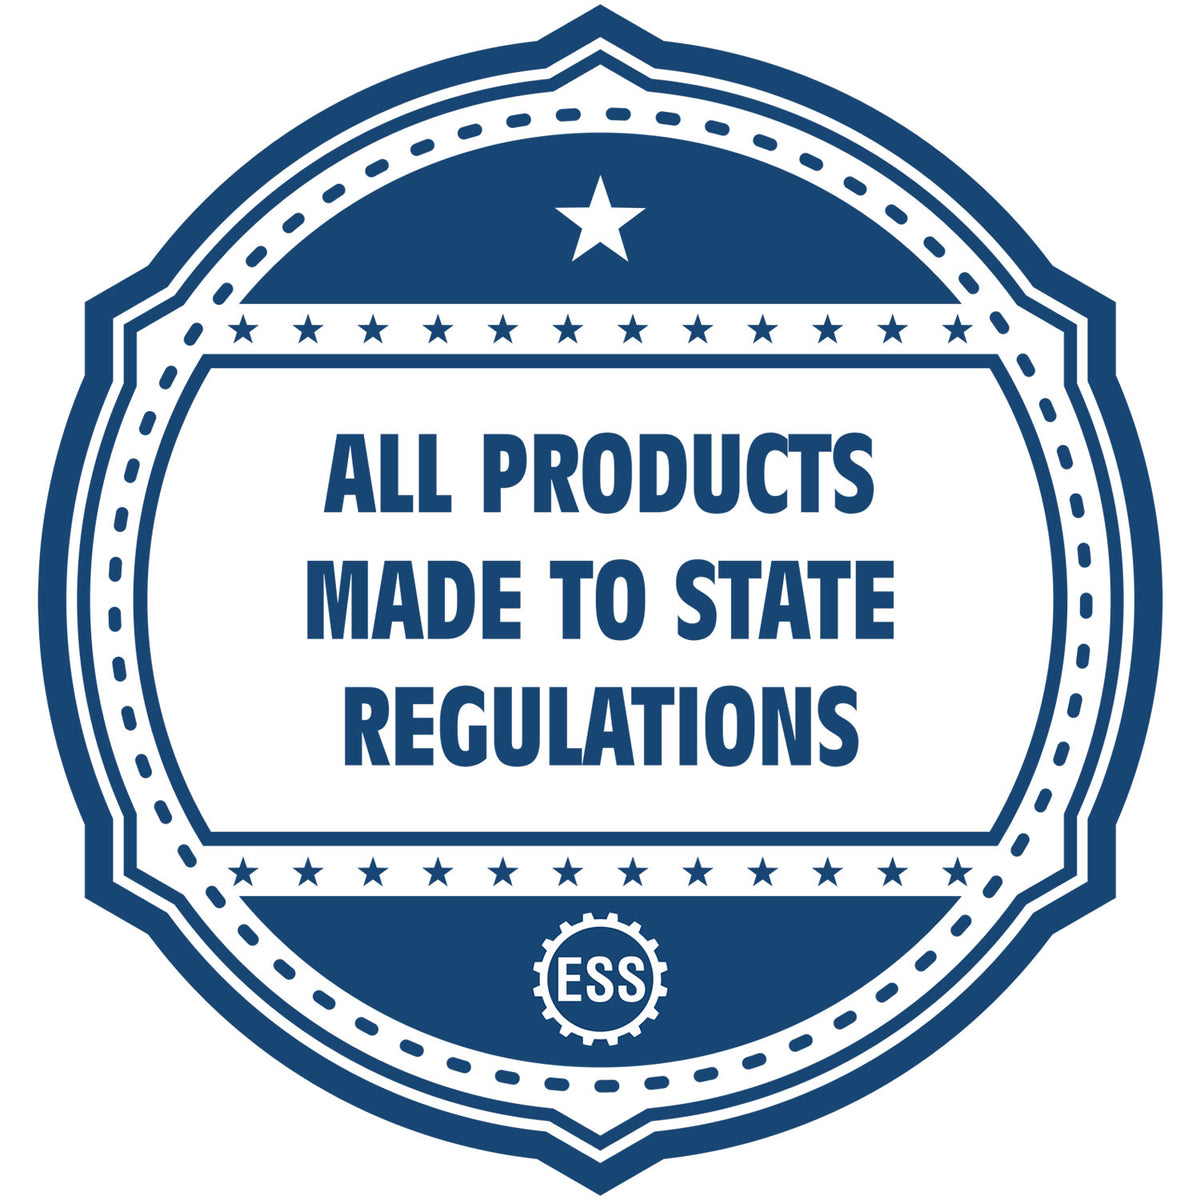 A blue icon or badge for the Texas Professional Geologist Seal Stamp showing that this product is made in compliance with state regulations.